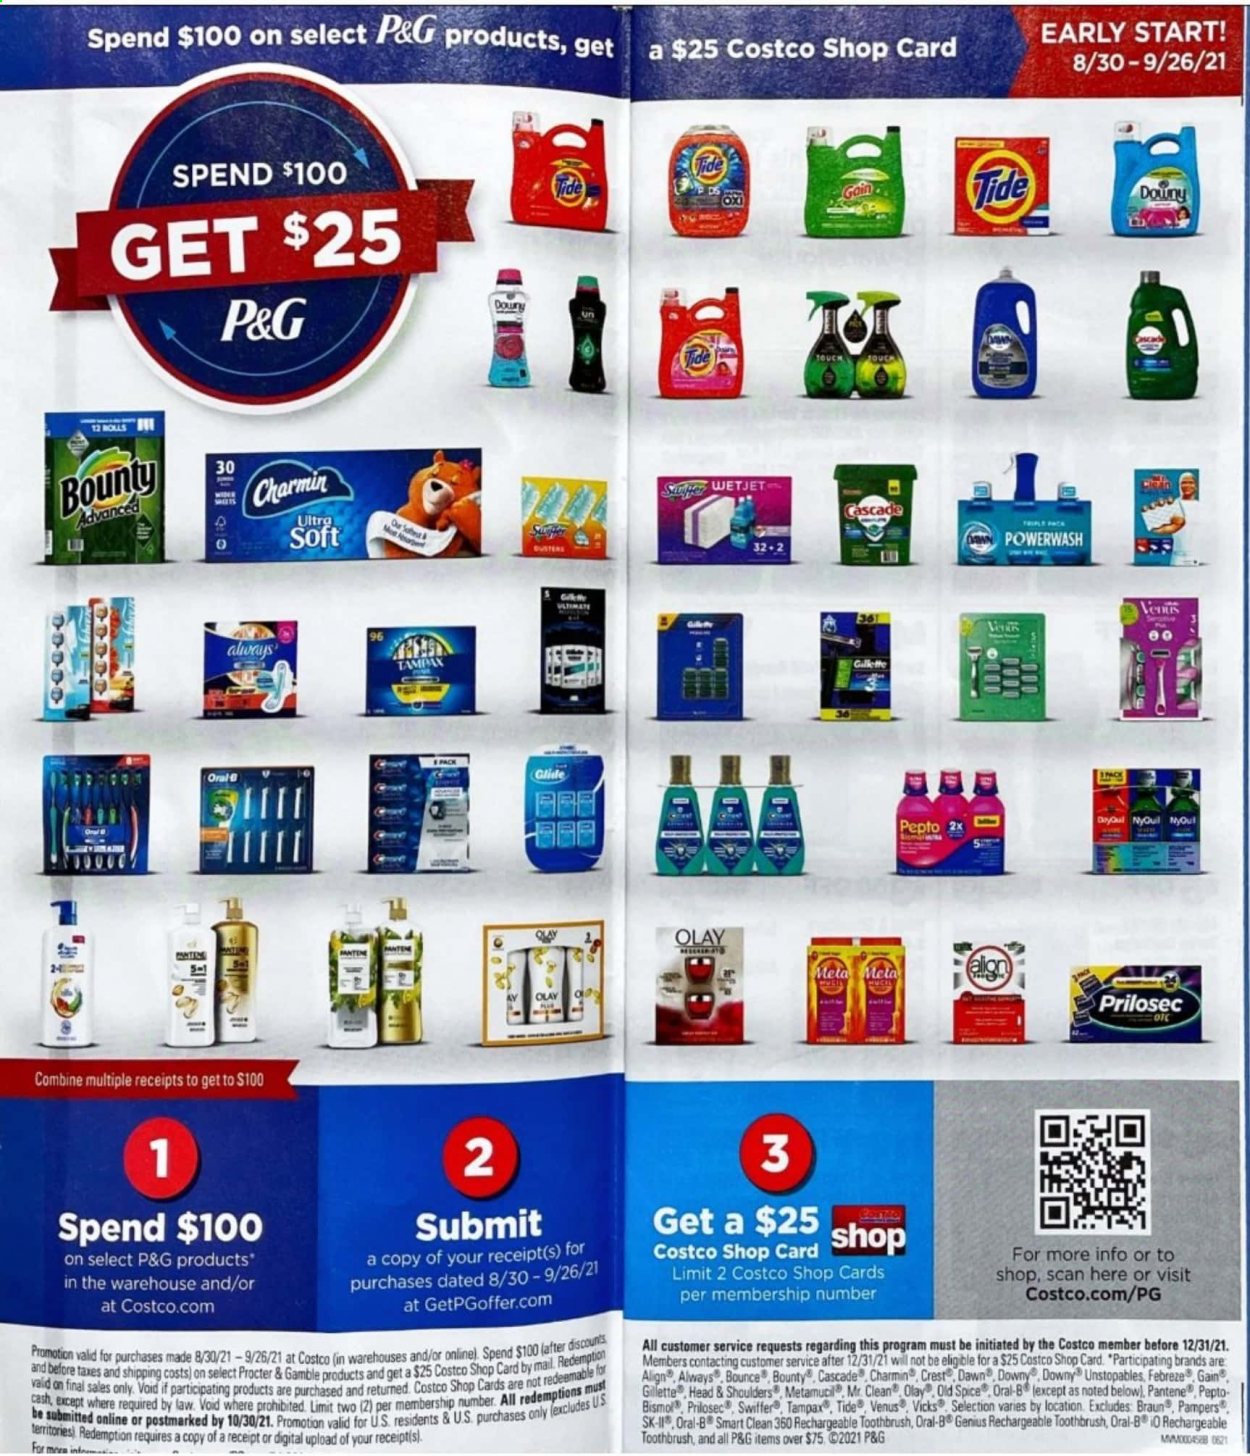 thumbnail - Costco Flyer - Sales products - Bounty, spice, Pampers, Charmin, Febreze, Gain, Swiffer, Cascade, Tide, Unstopables, Bounce, Old Spice, toothbrush, Oral-B, Crest, Tampax, Olay, Head & Shoulders, Pantene, Gillette, Venus, Vicks, WetJet, Braun, Metamucil. Page 2.